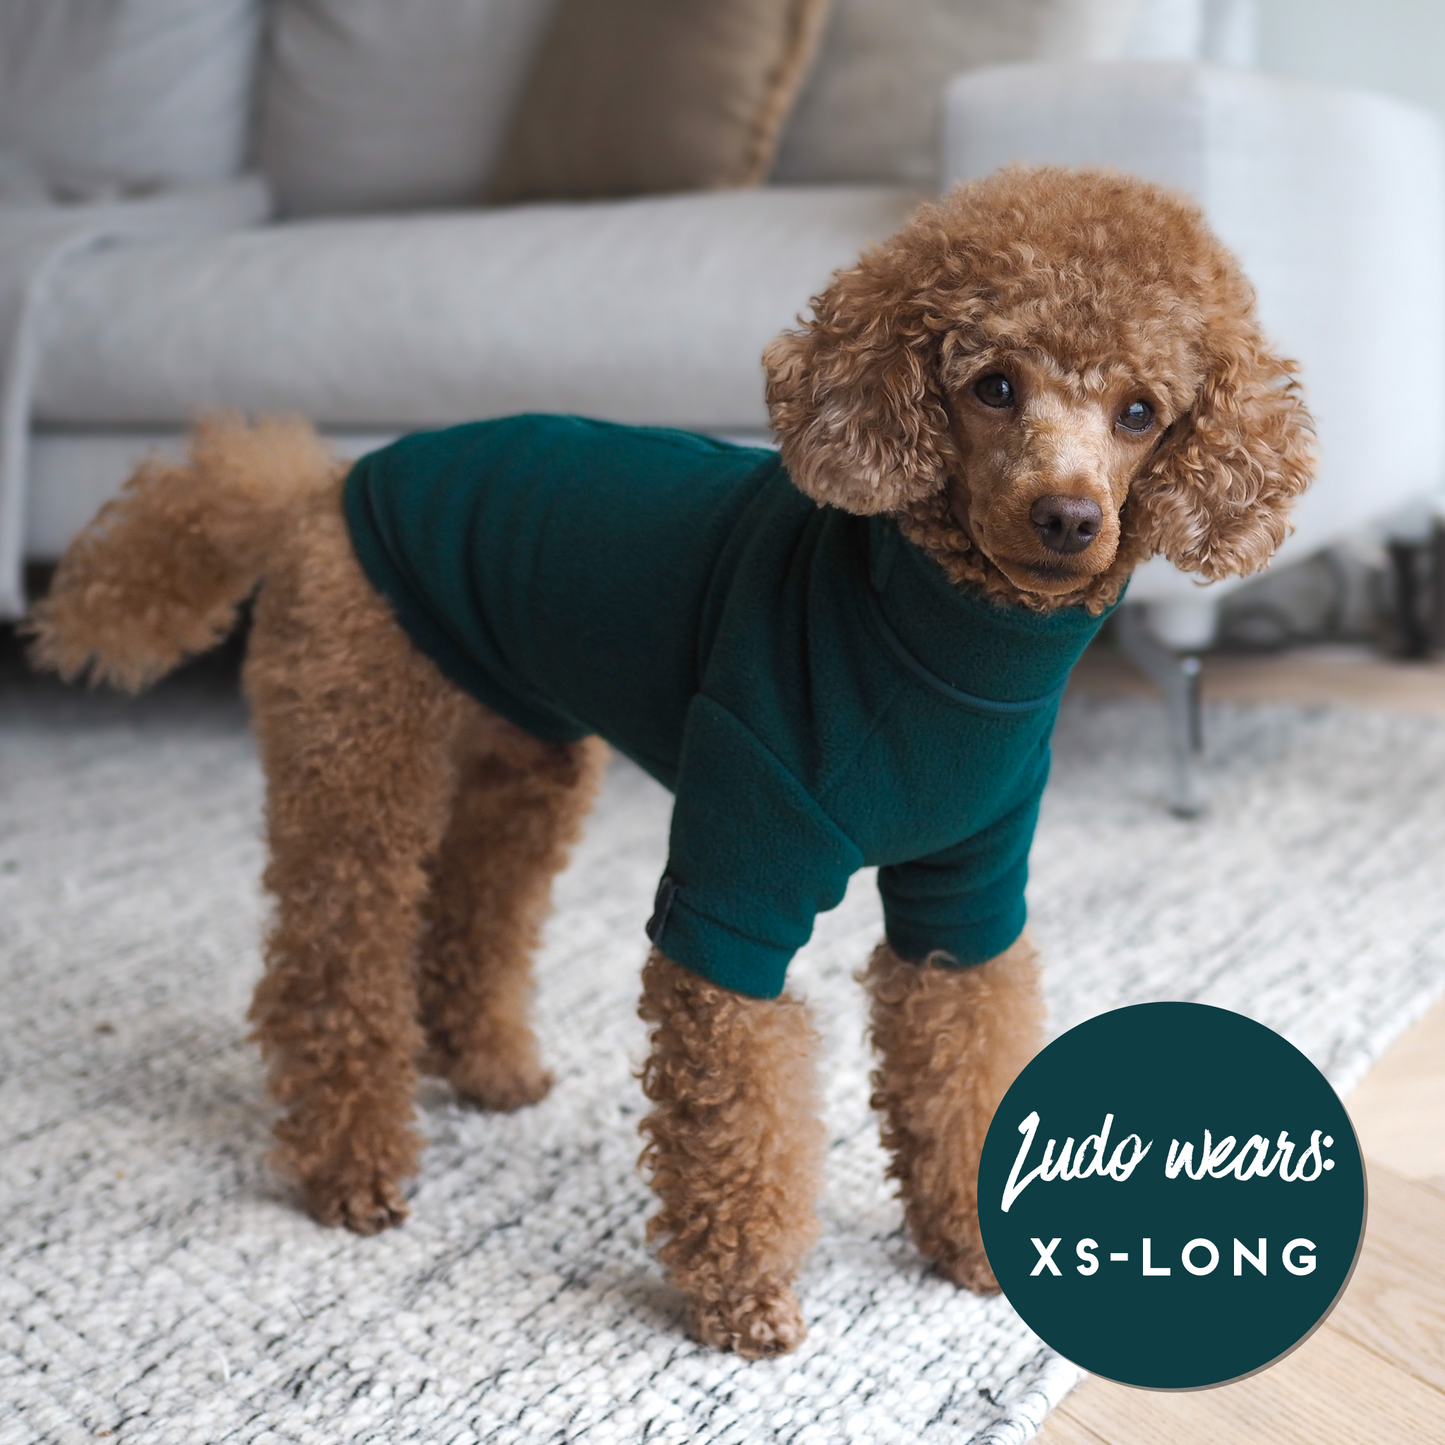 Cosy Dog Fleece Jumper - Zip Up / Step in Style | Teal